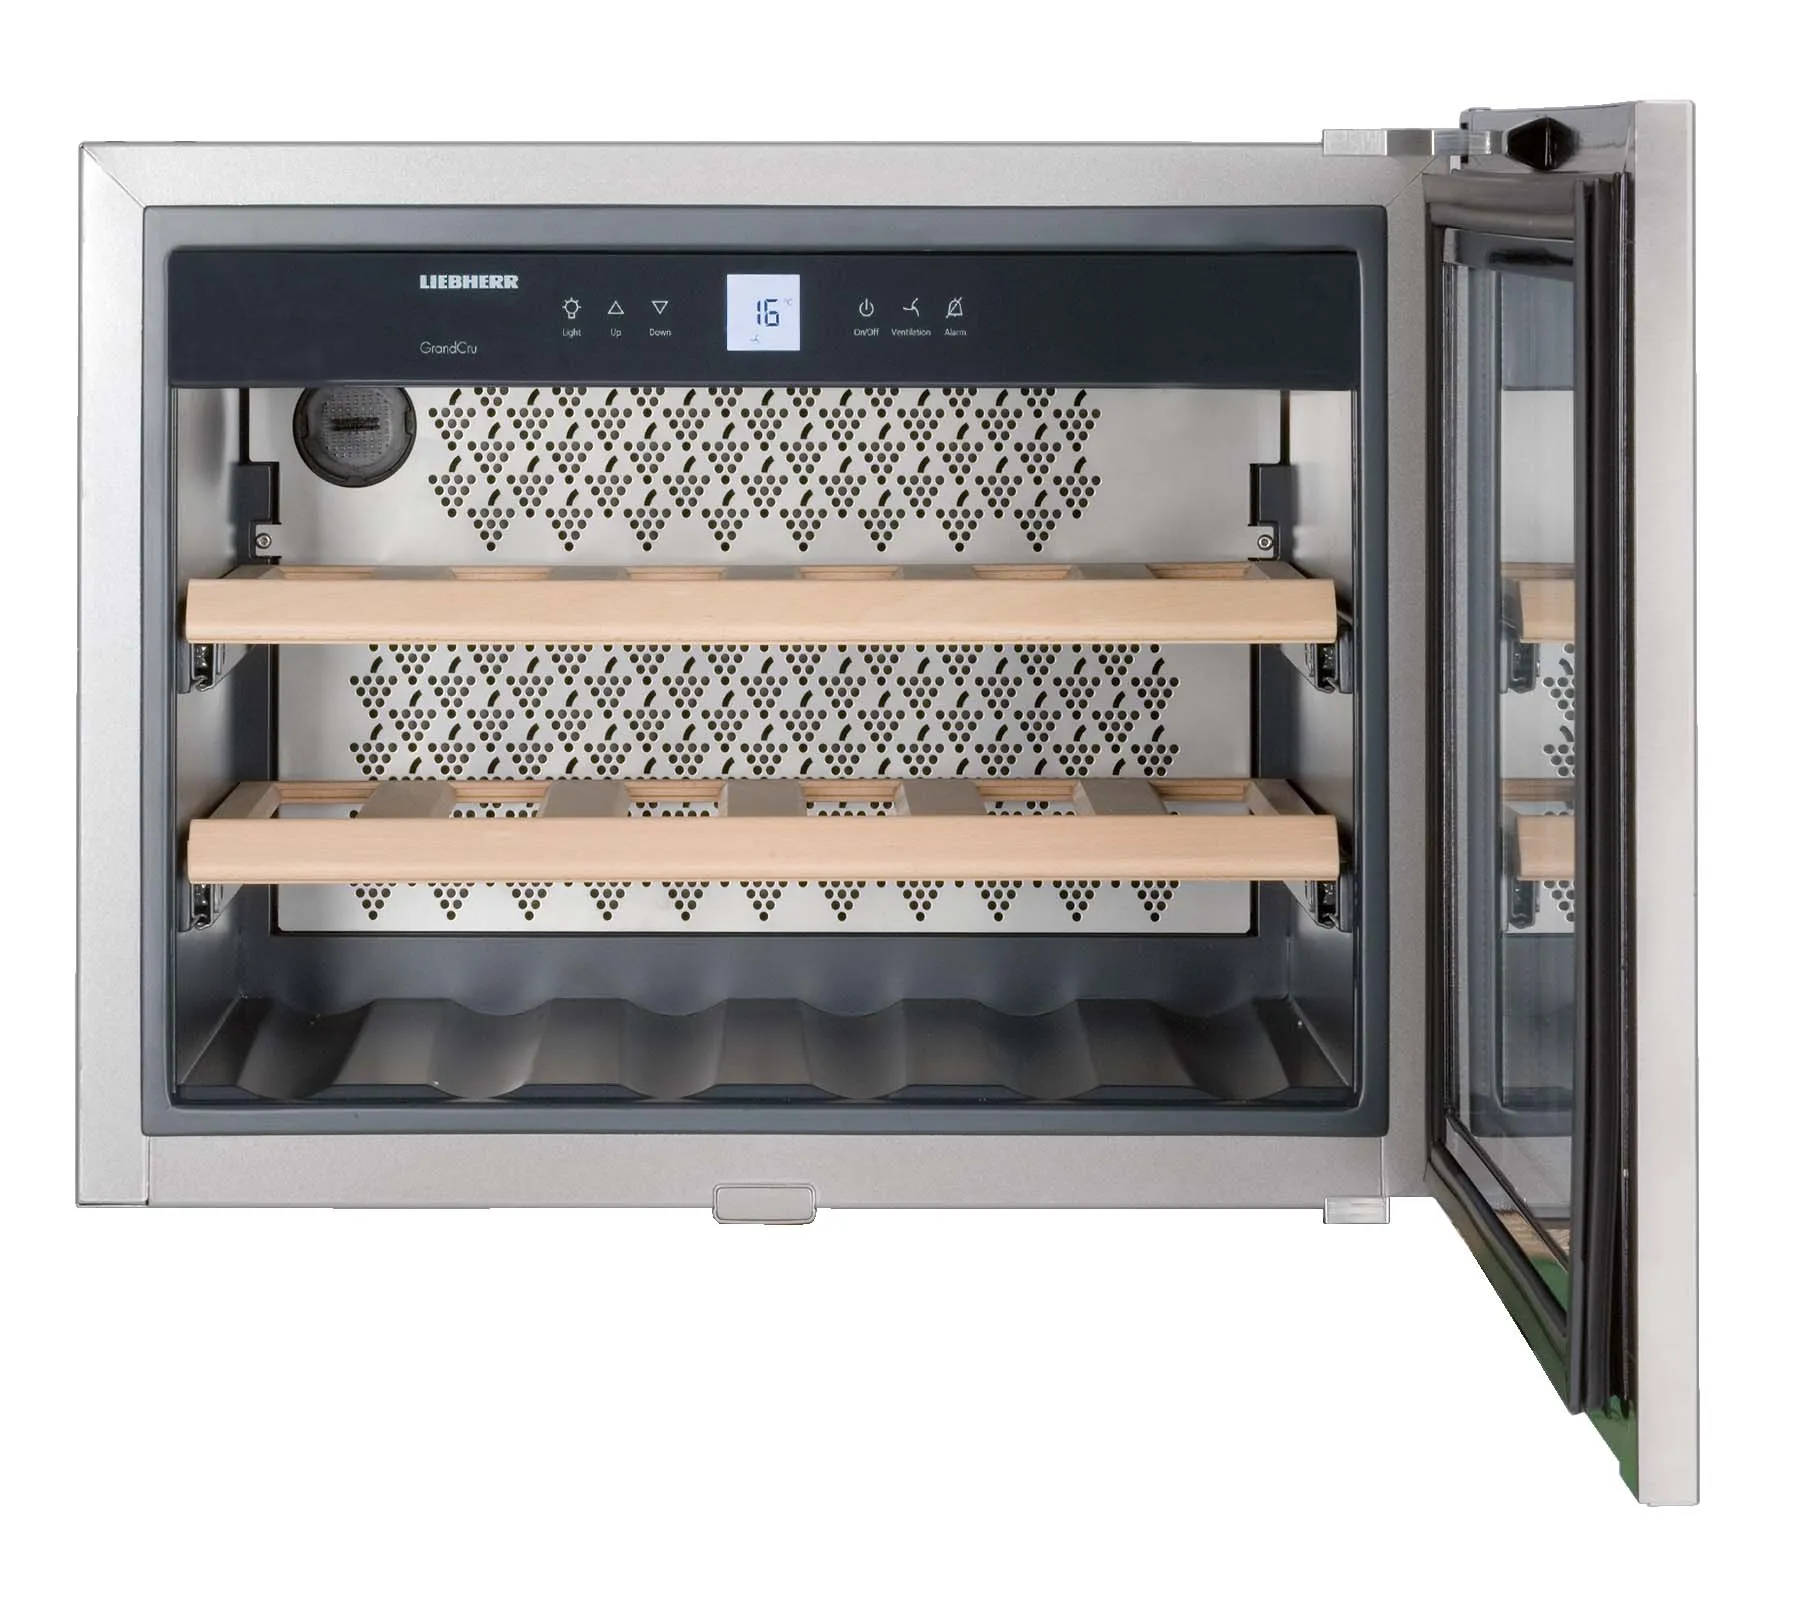 GrandCru air-conditioned cellars that can be integrated -Niche height 45 cm WKEes 553 Liebherr